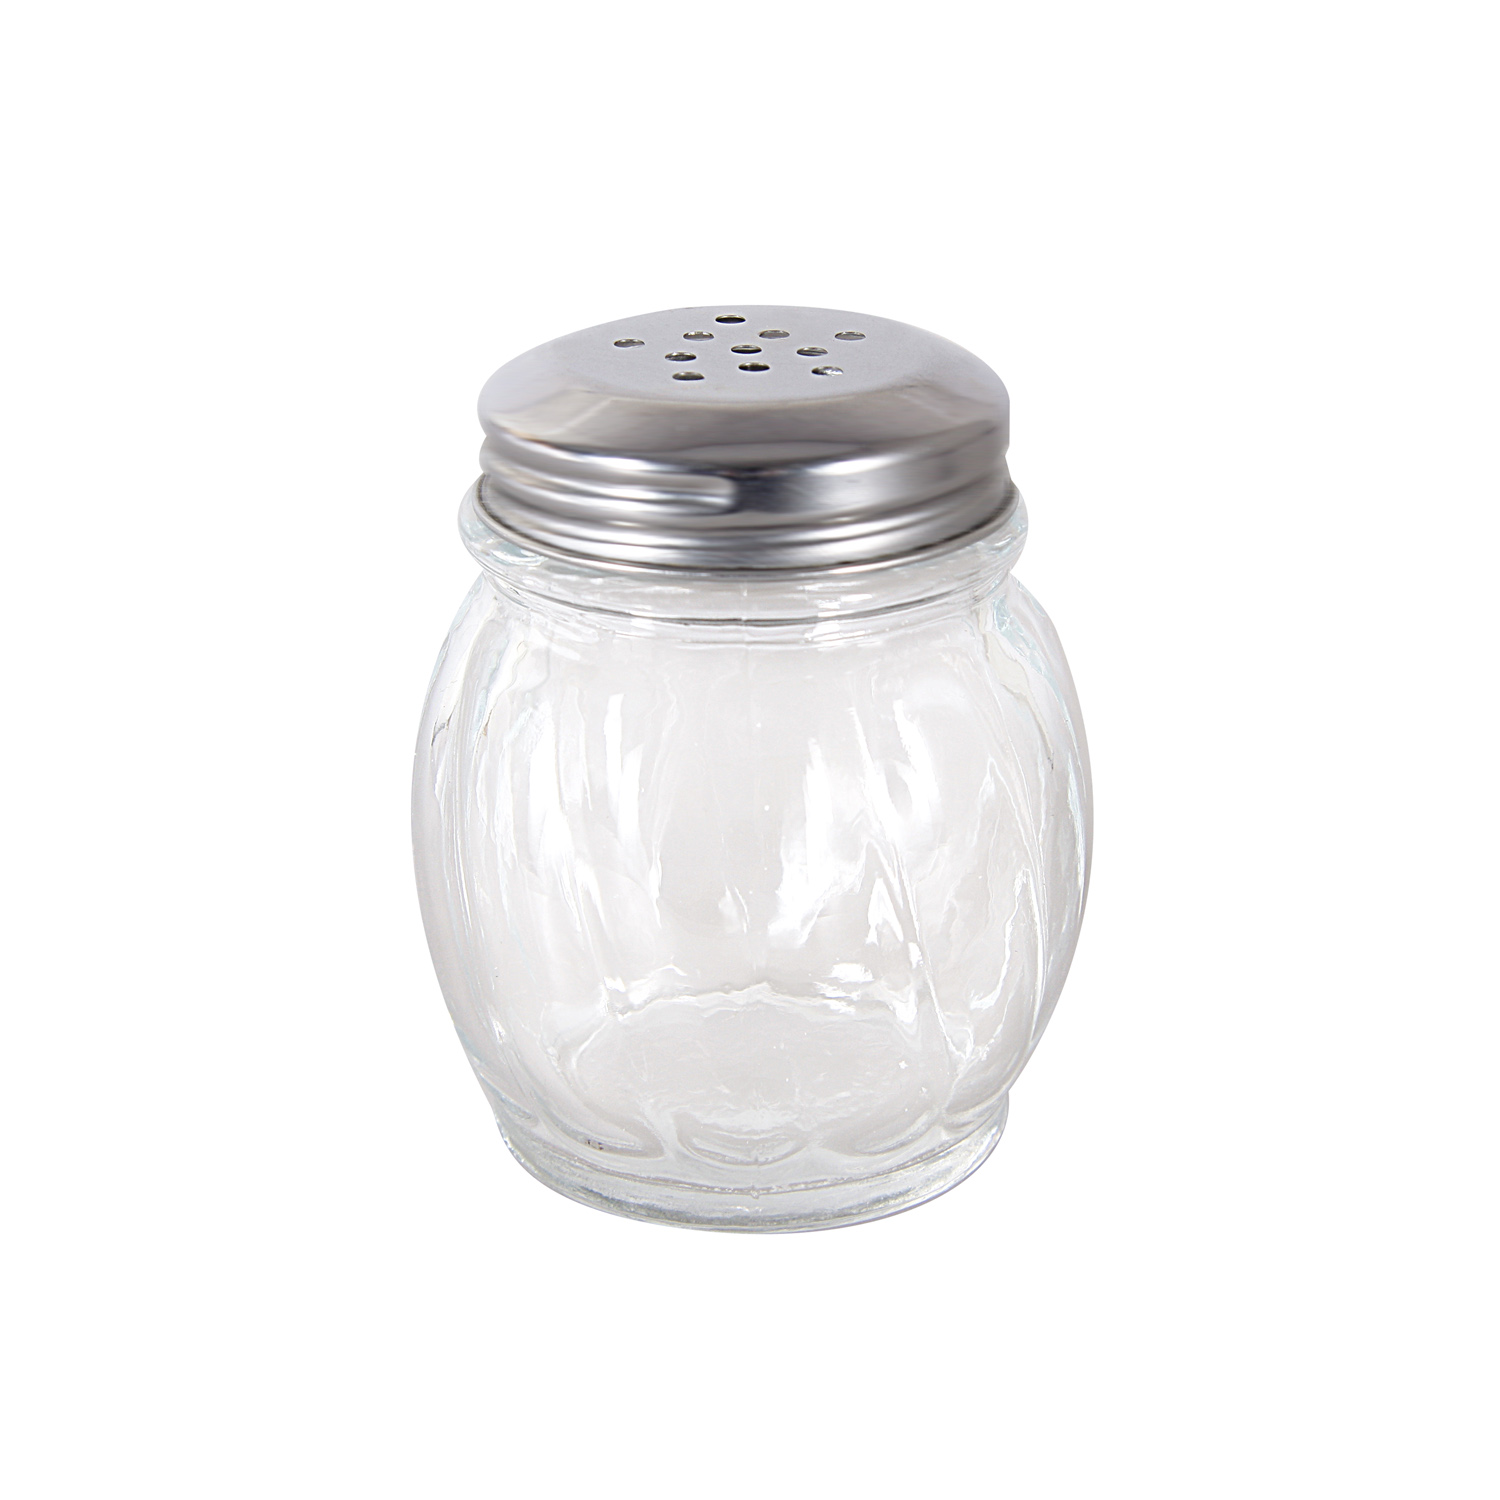 CAC China G5CS-6P Glass Cheese Shaker with Stainless Steel Perforated Top 6 oz.  - 1 dozen